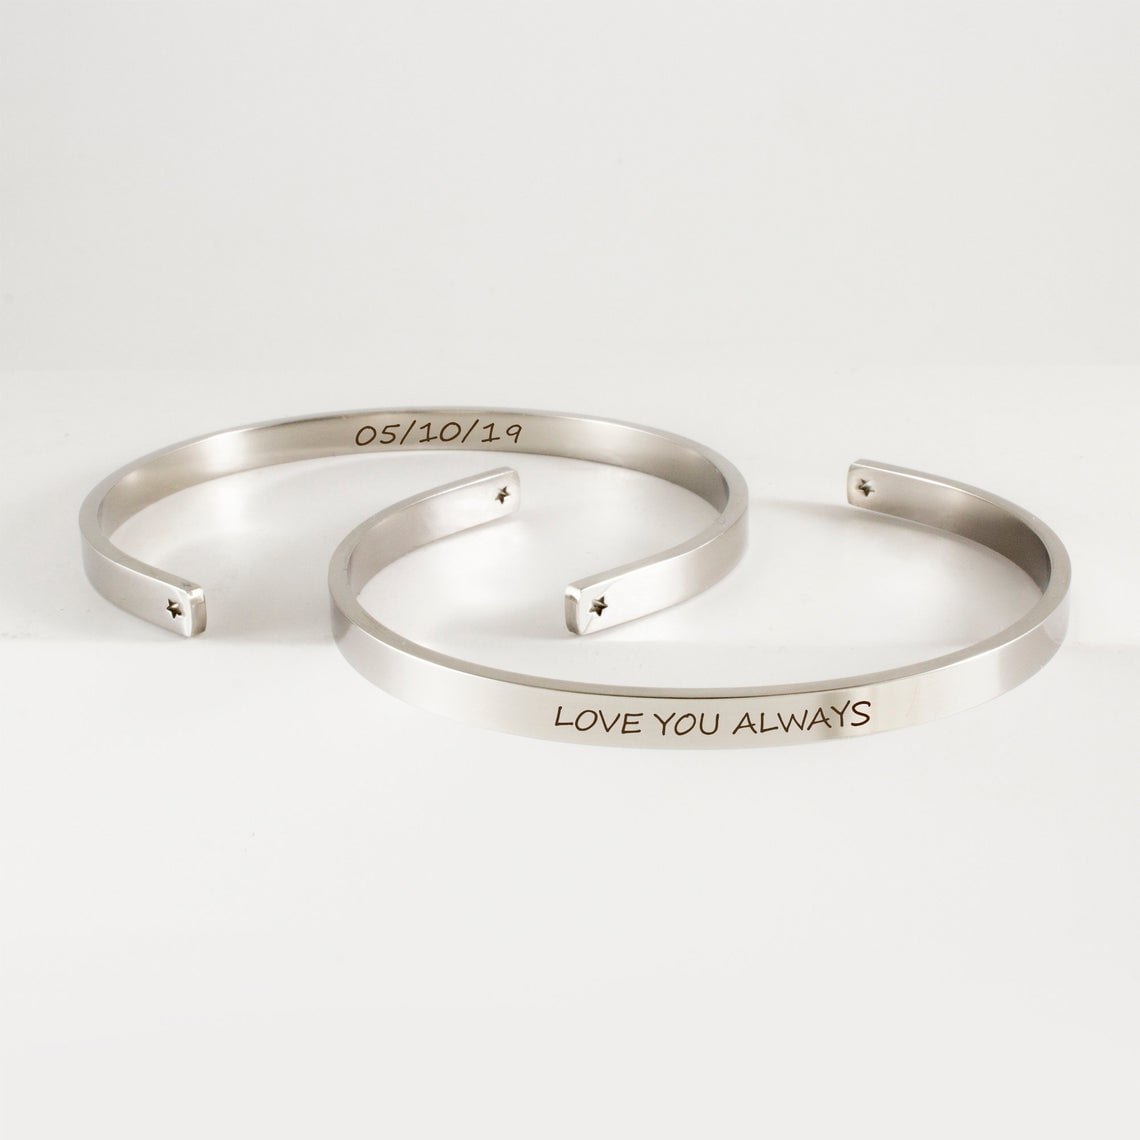 Father s Day Gift Couple s Him Matching His Hers Set Personalized Roman Numerals Anniversary Date Dad Engravable Cuff Bangle Bracelet Box M Silver W c3ad72b9 ea07 4300 beac d547a372f6ab.fc878522b6ac26b0babad81ebfe4a6b7